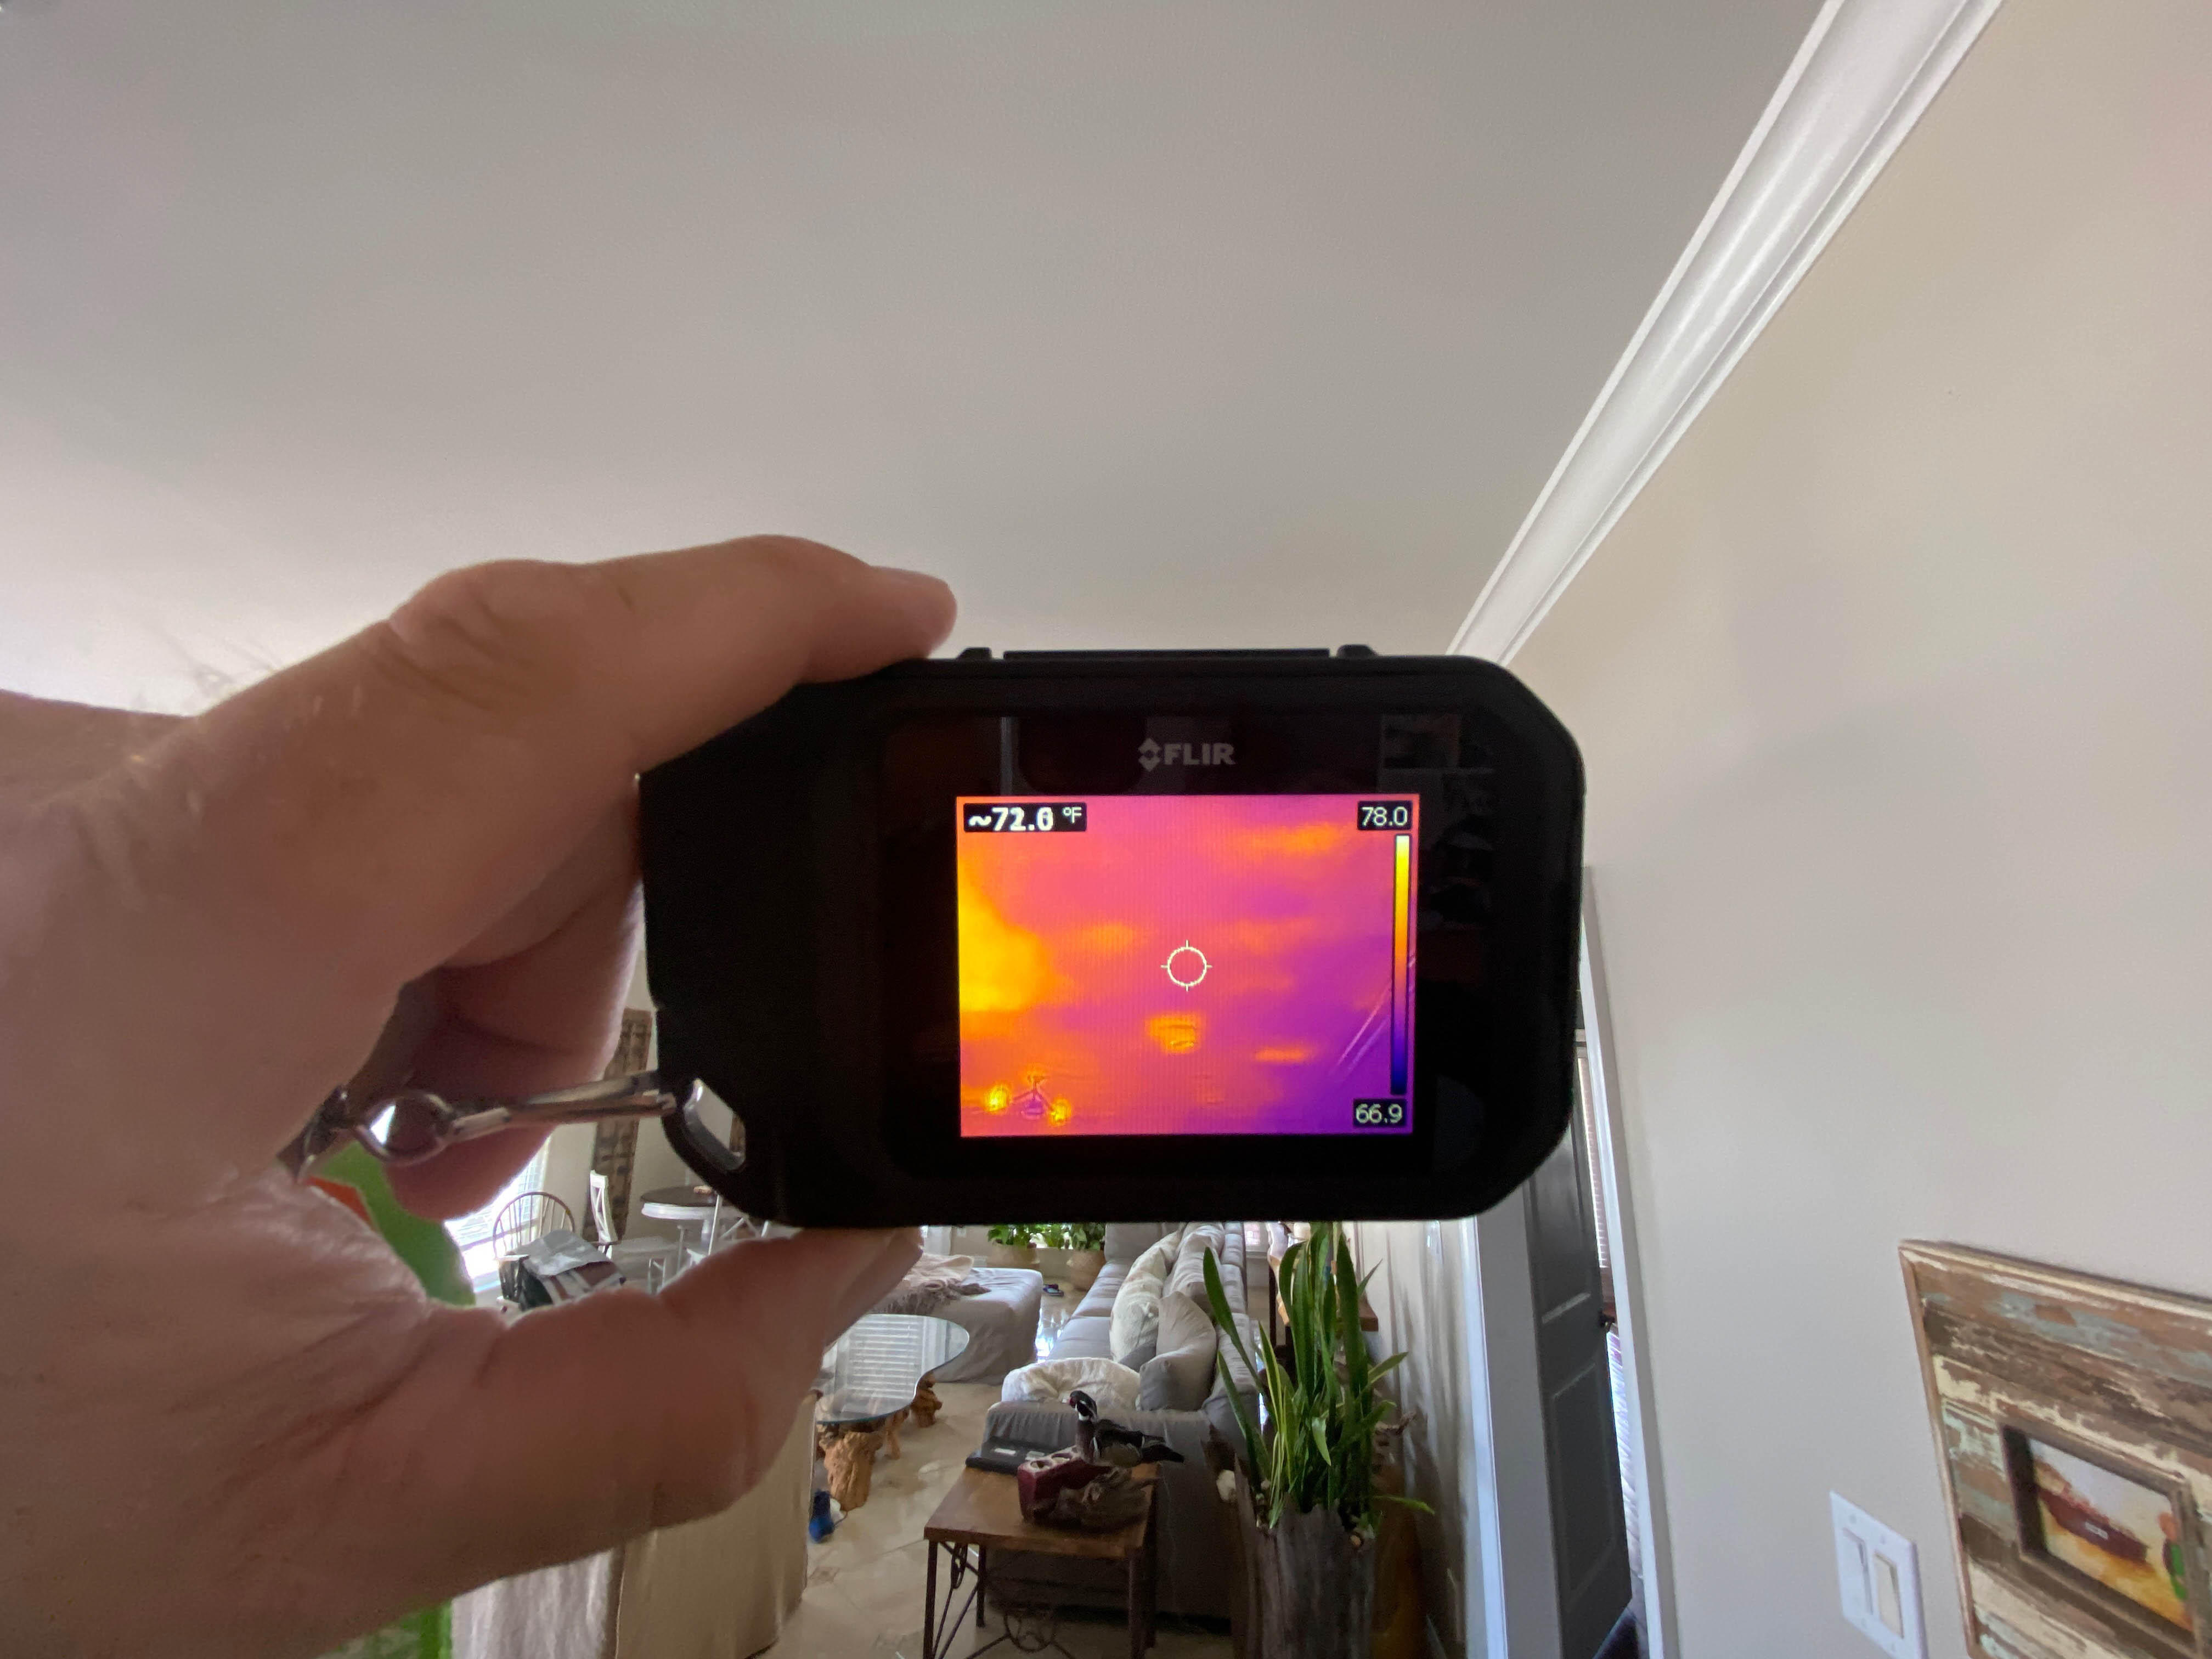 Our SERVPRO of Santa Barbara crew uses highly advanced technology to quickly locate moisture after a water loss.